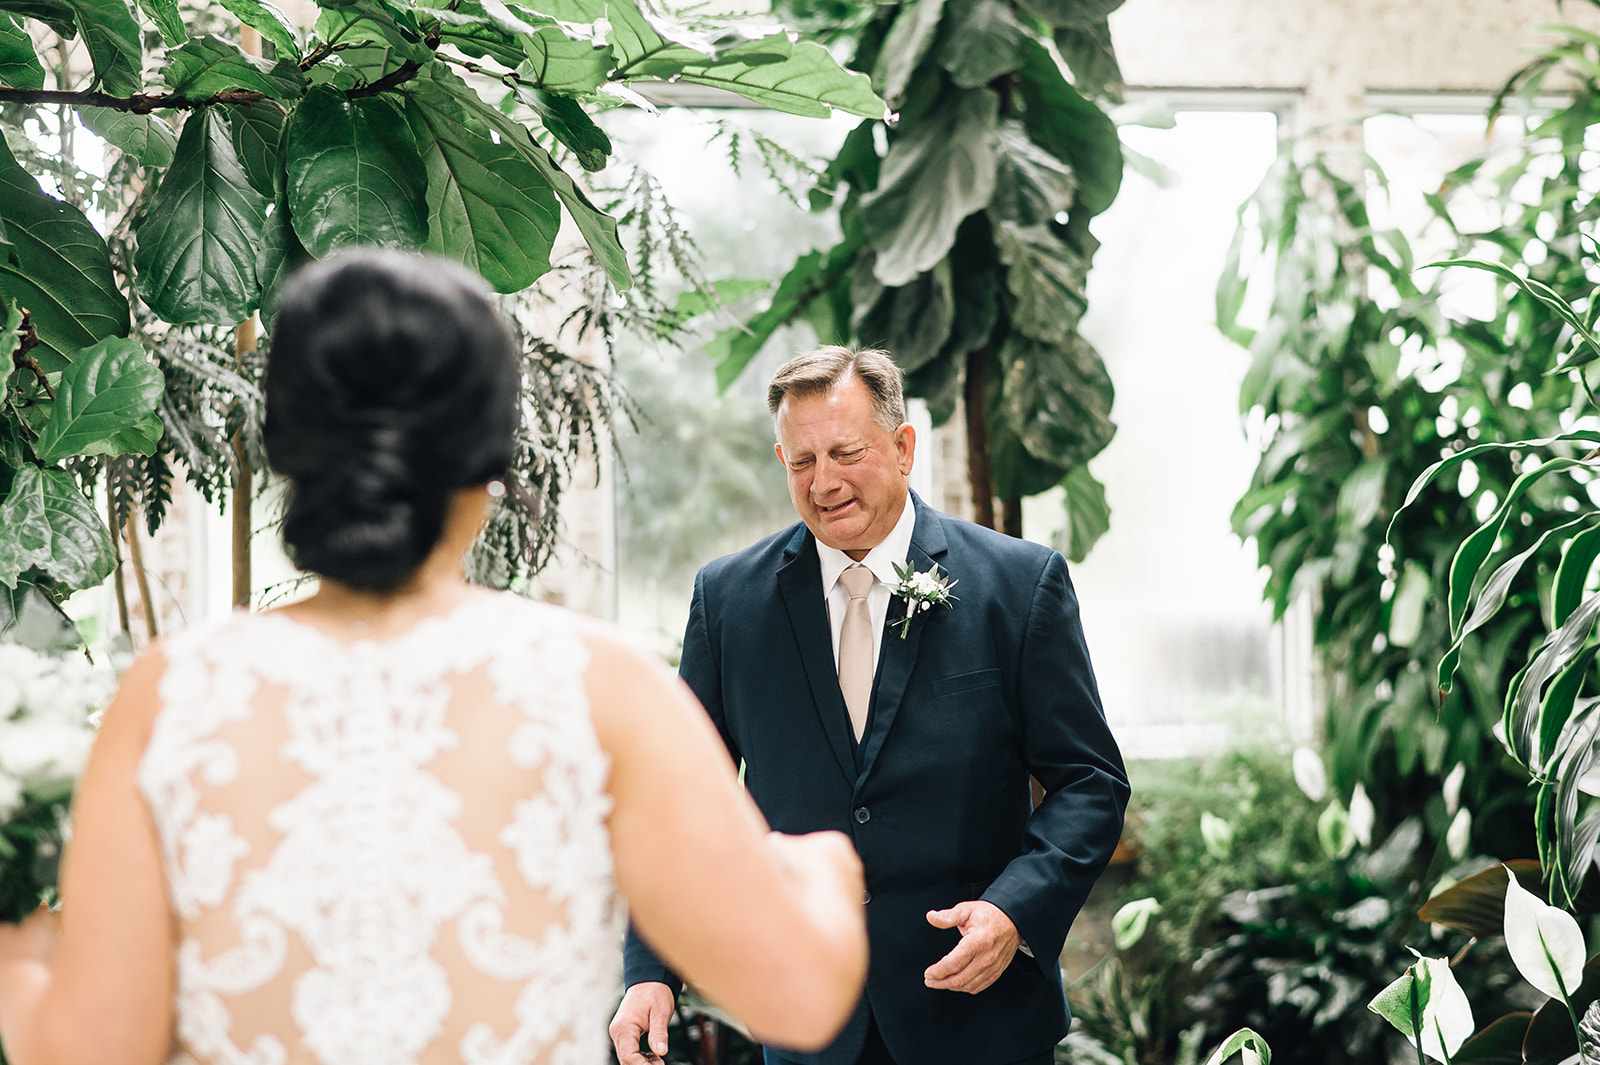 October Wedding at The Greenery in Amite, Louisiana. Photographed by Taylor Hubbs Photography, a Baton Rouge Wedding Pho